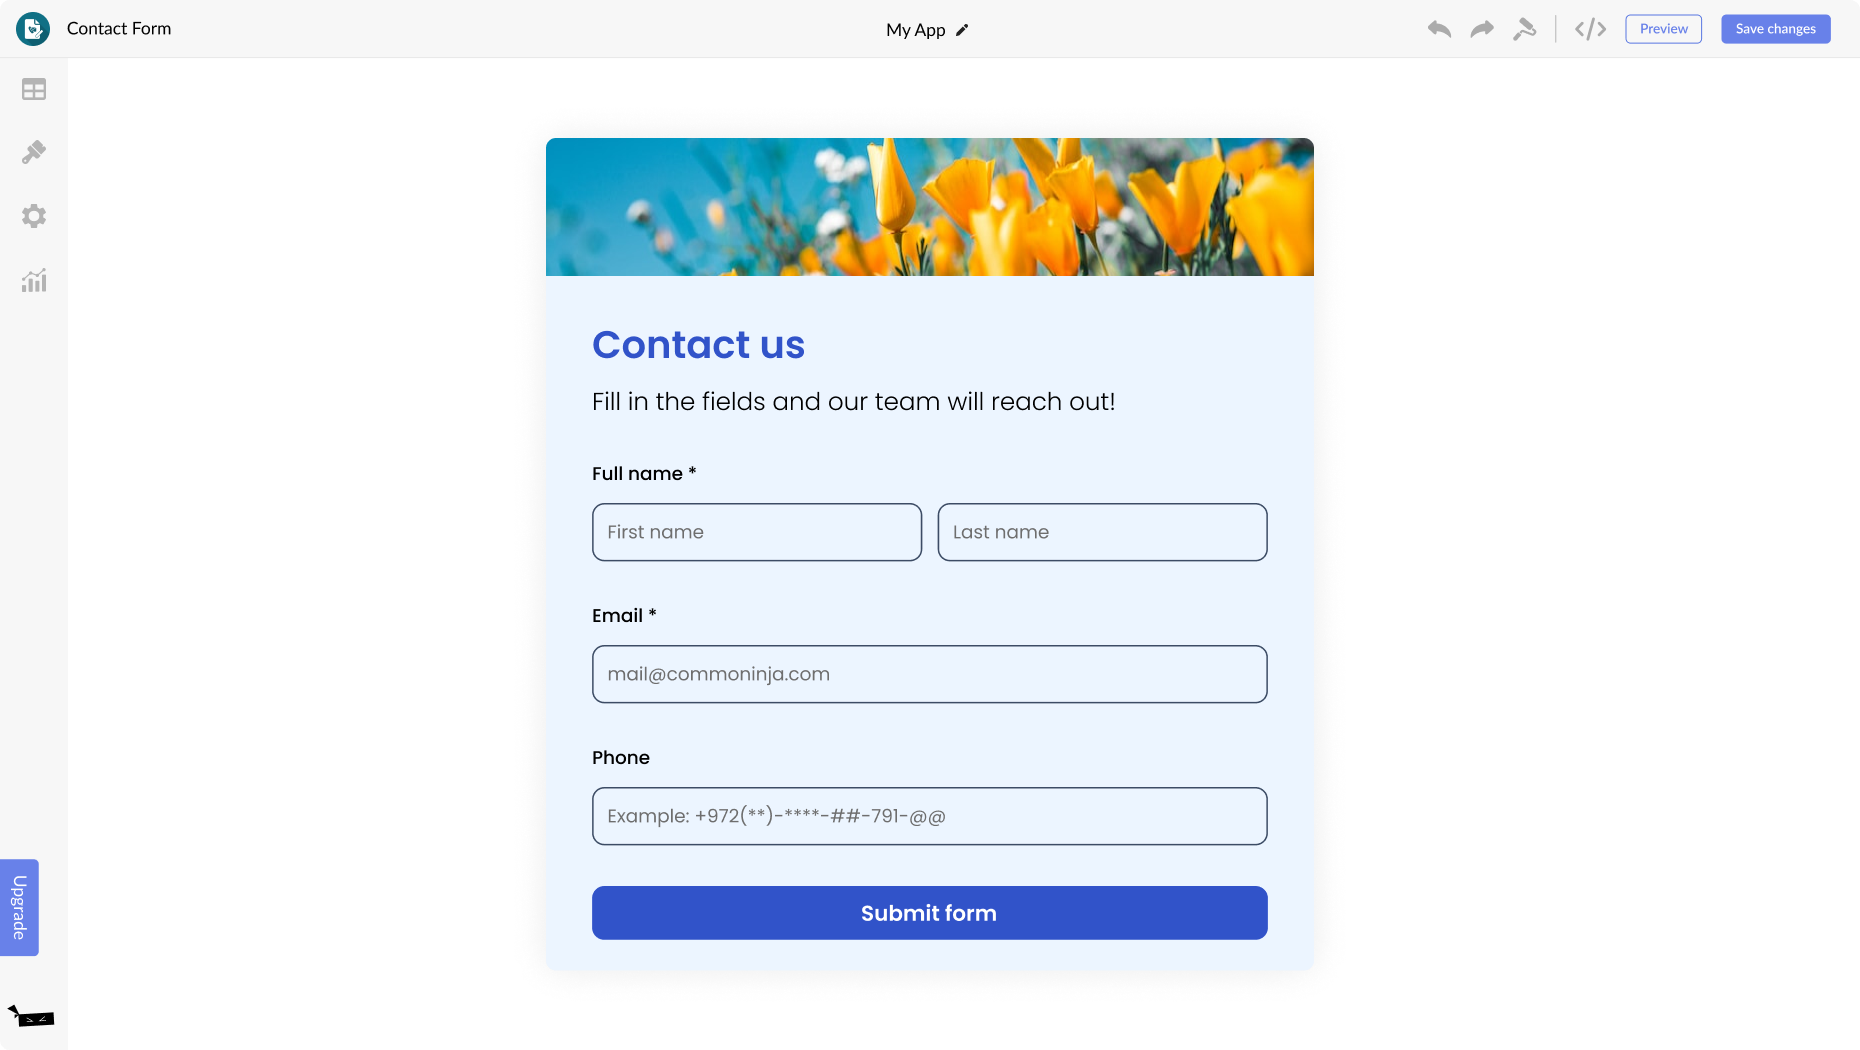 Contact Form for Publii